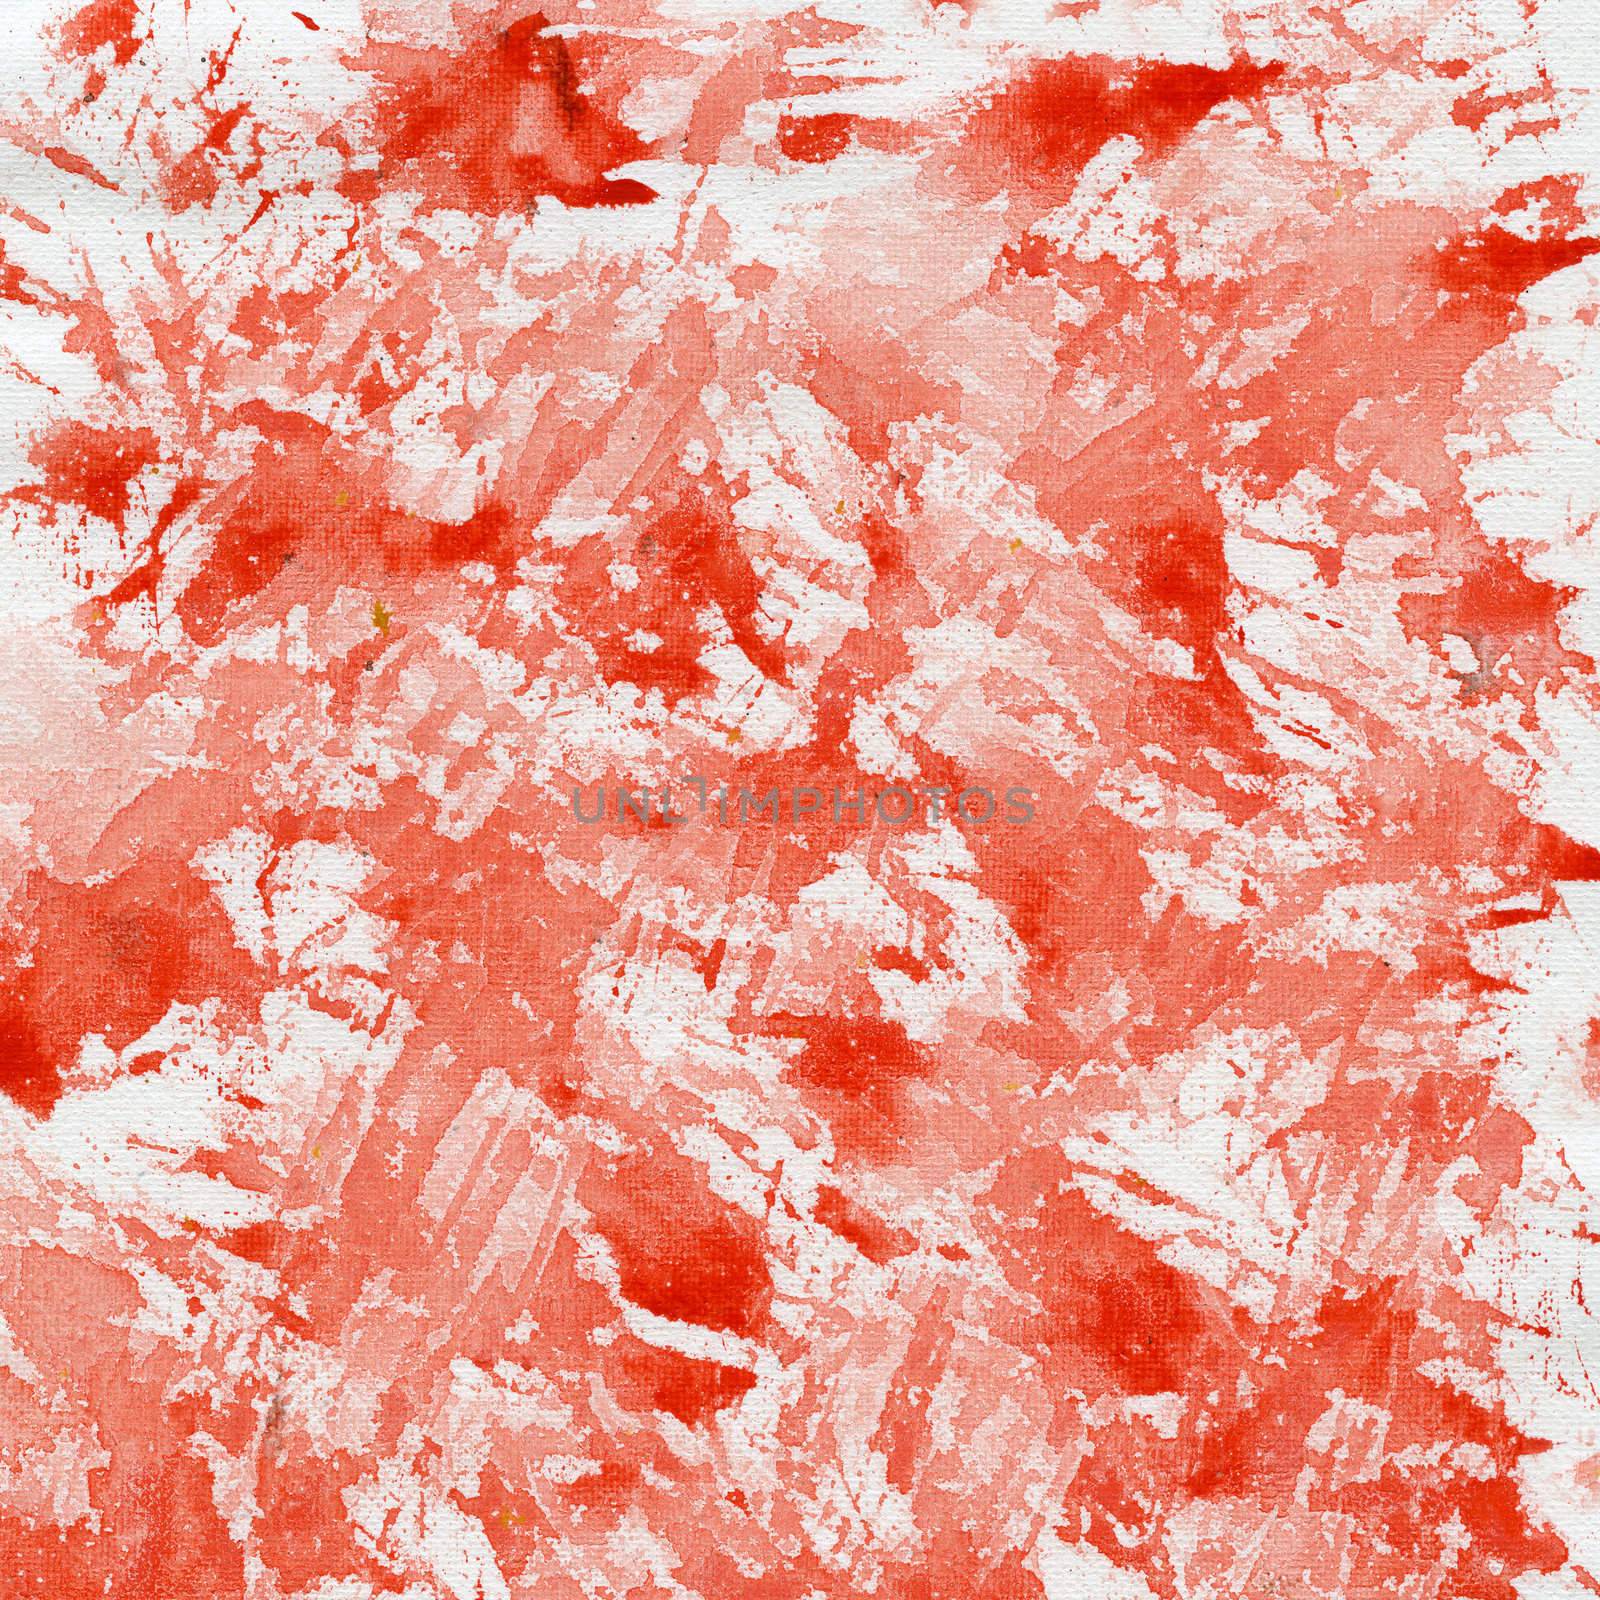 red splashes on canvas by PixelsAway